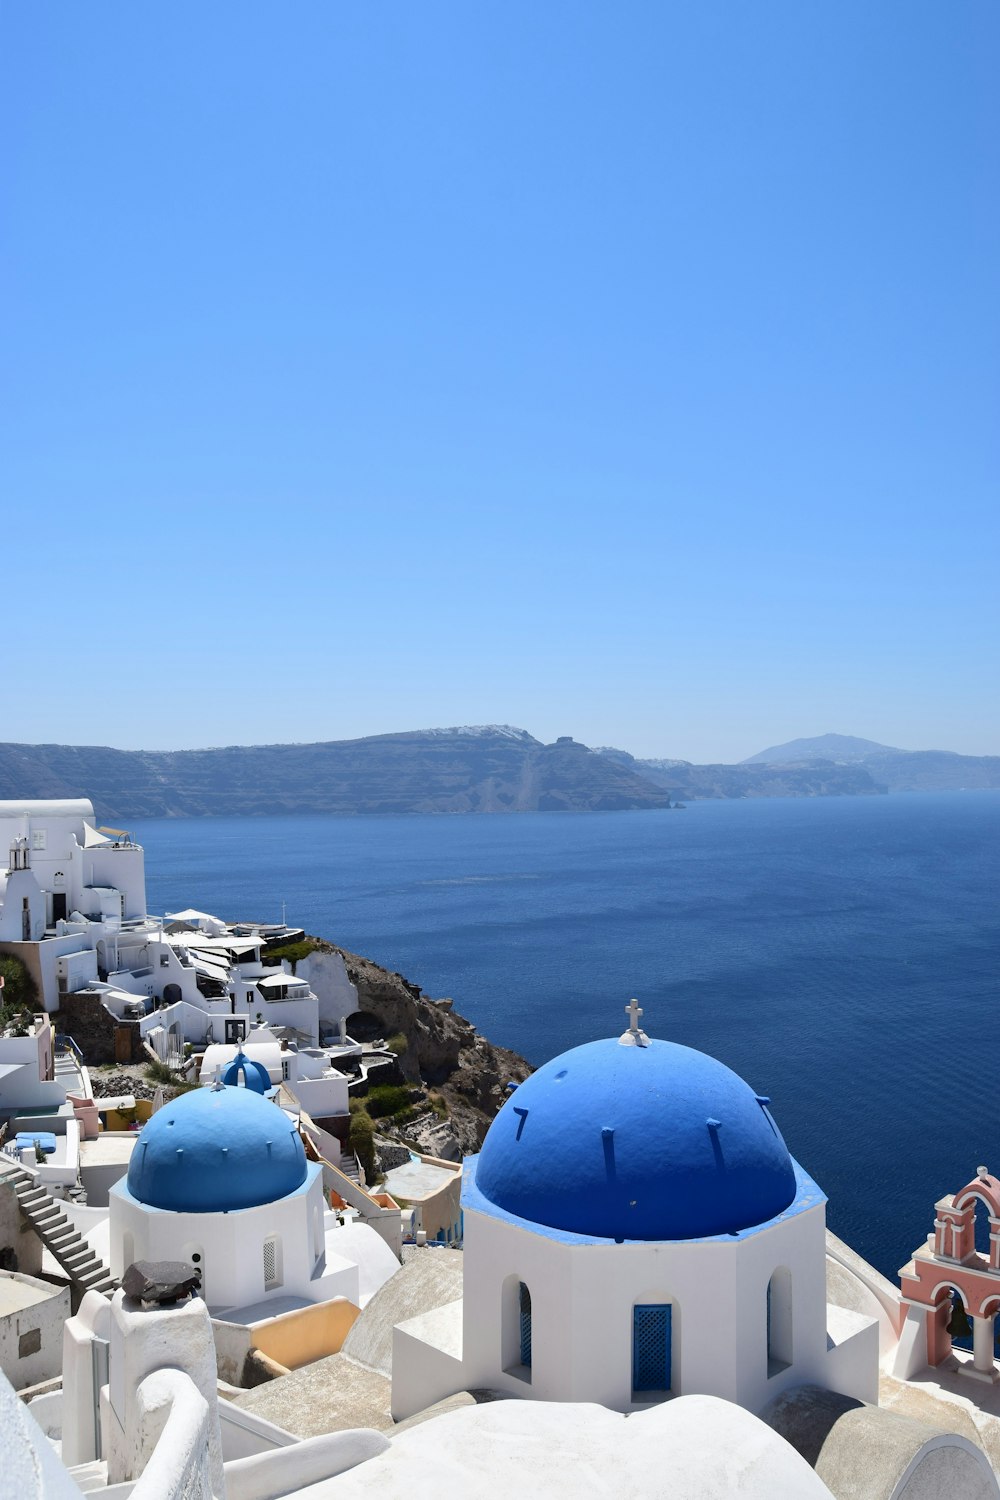 blue dome buidings in Santorini, Greece during daytime